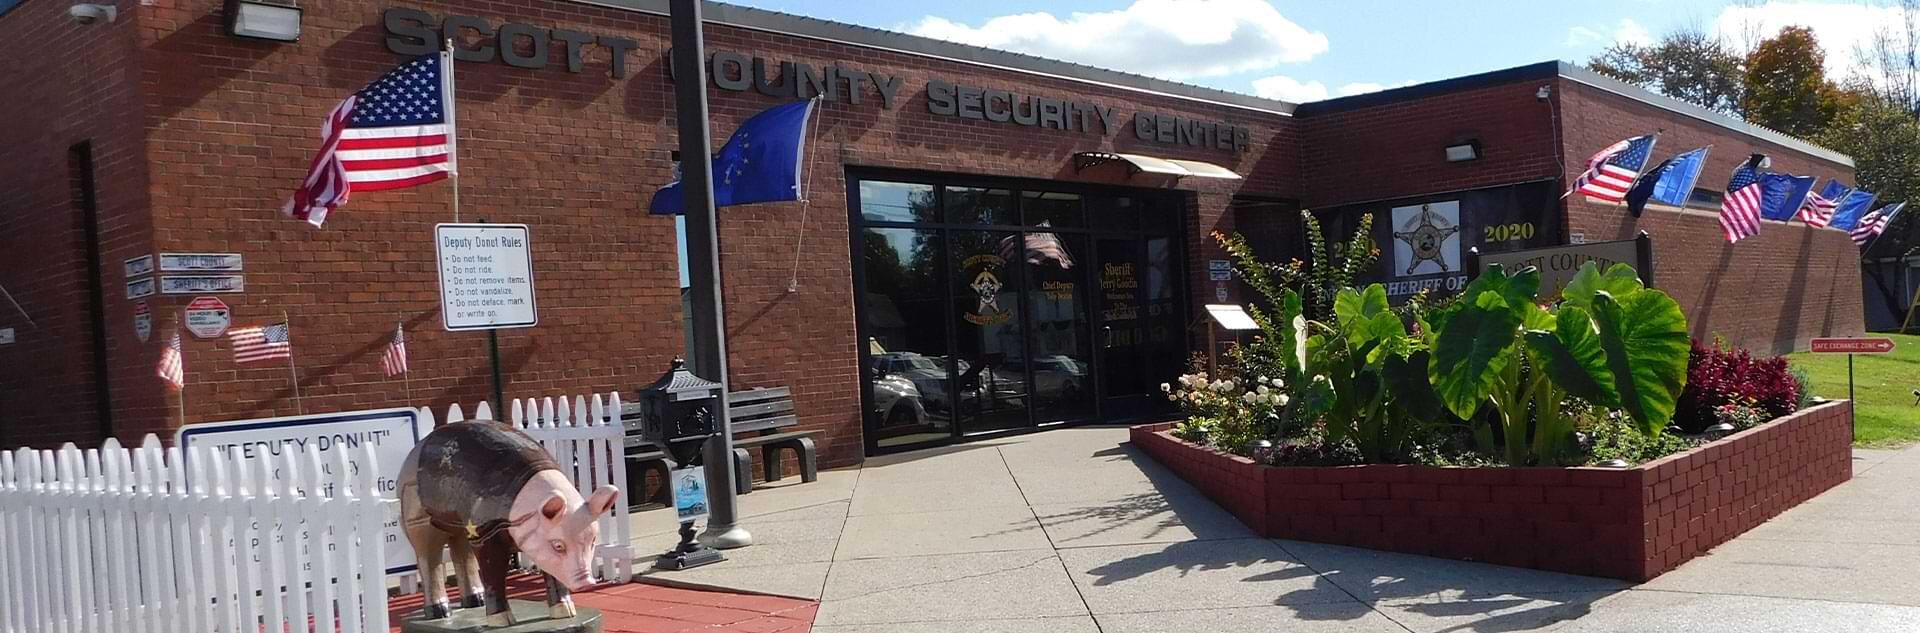 Entrance to the Scott County Security Center